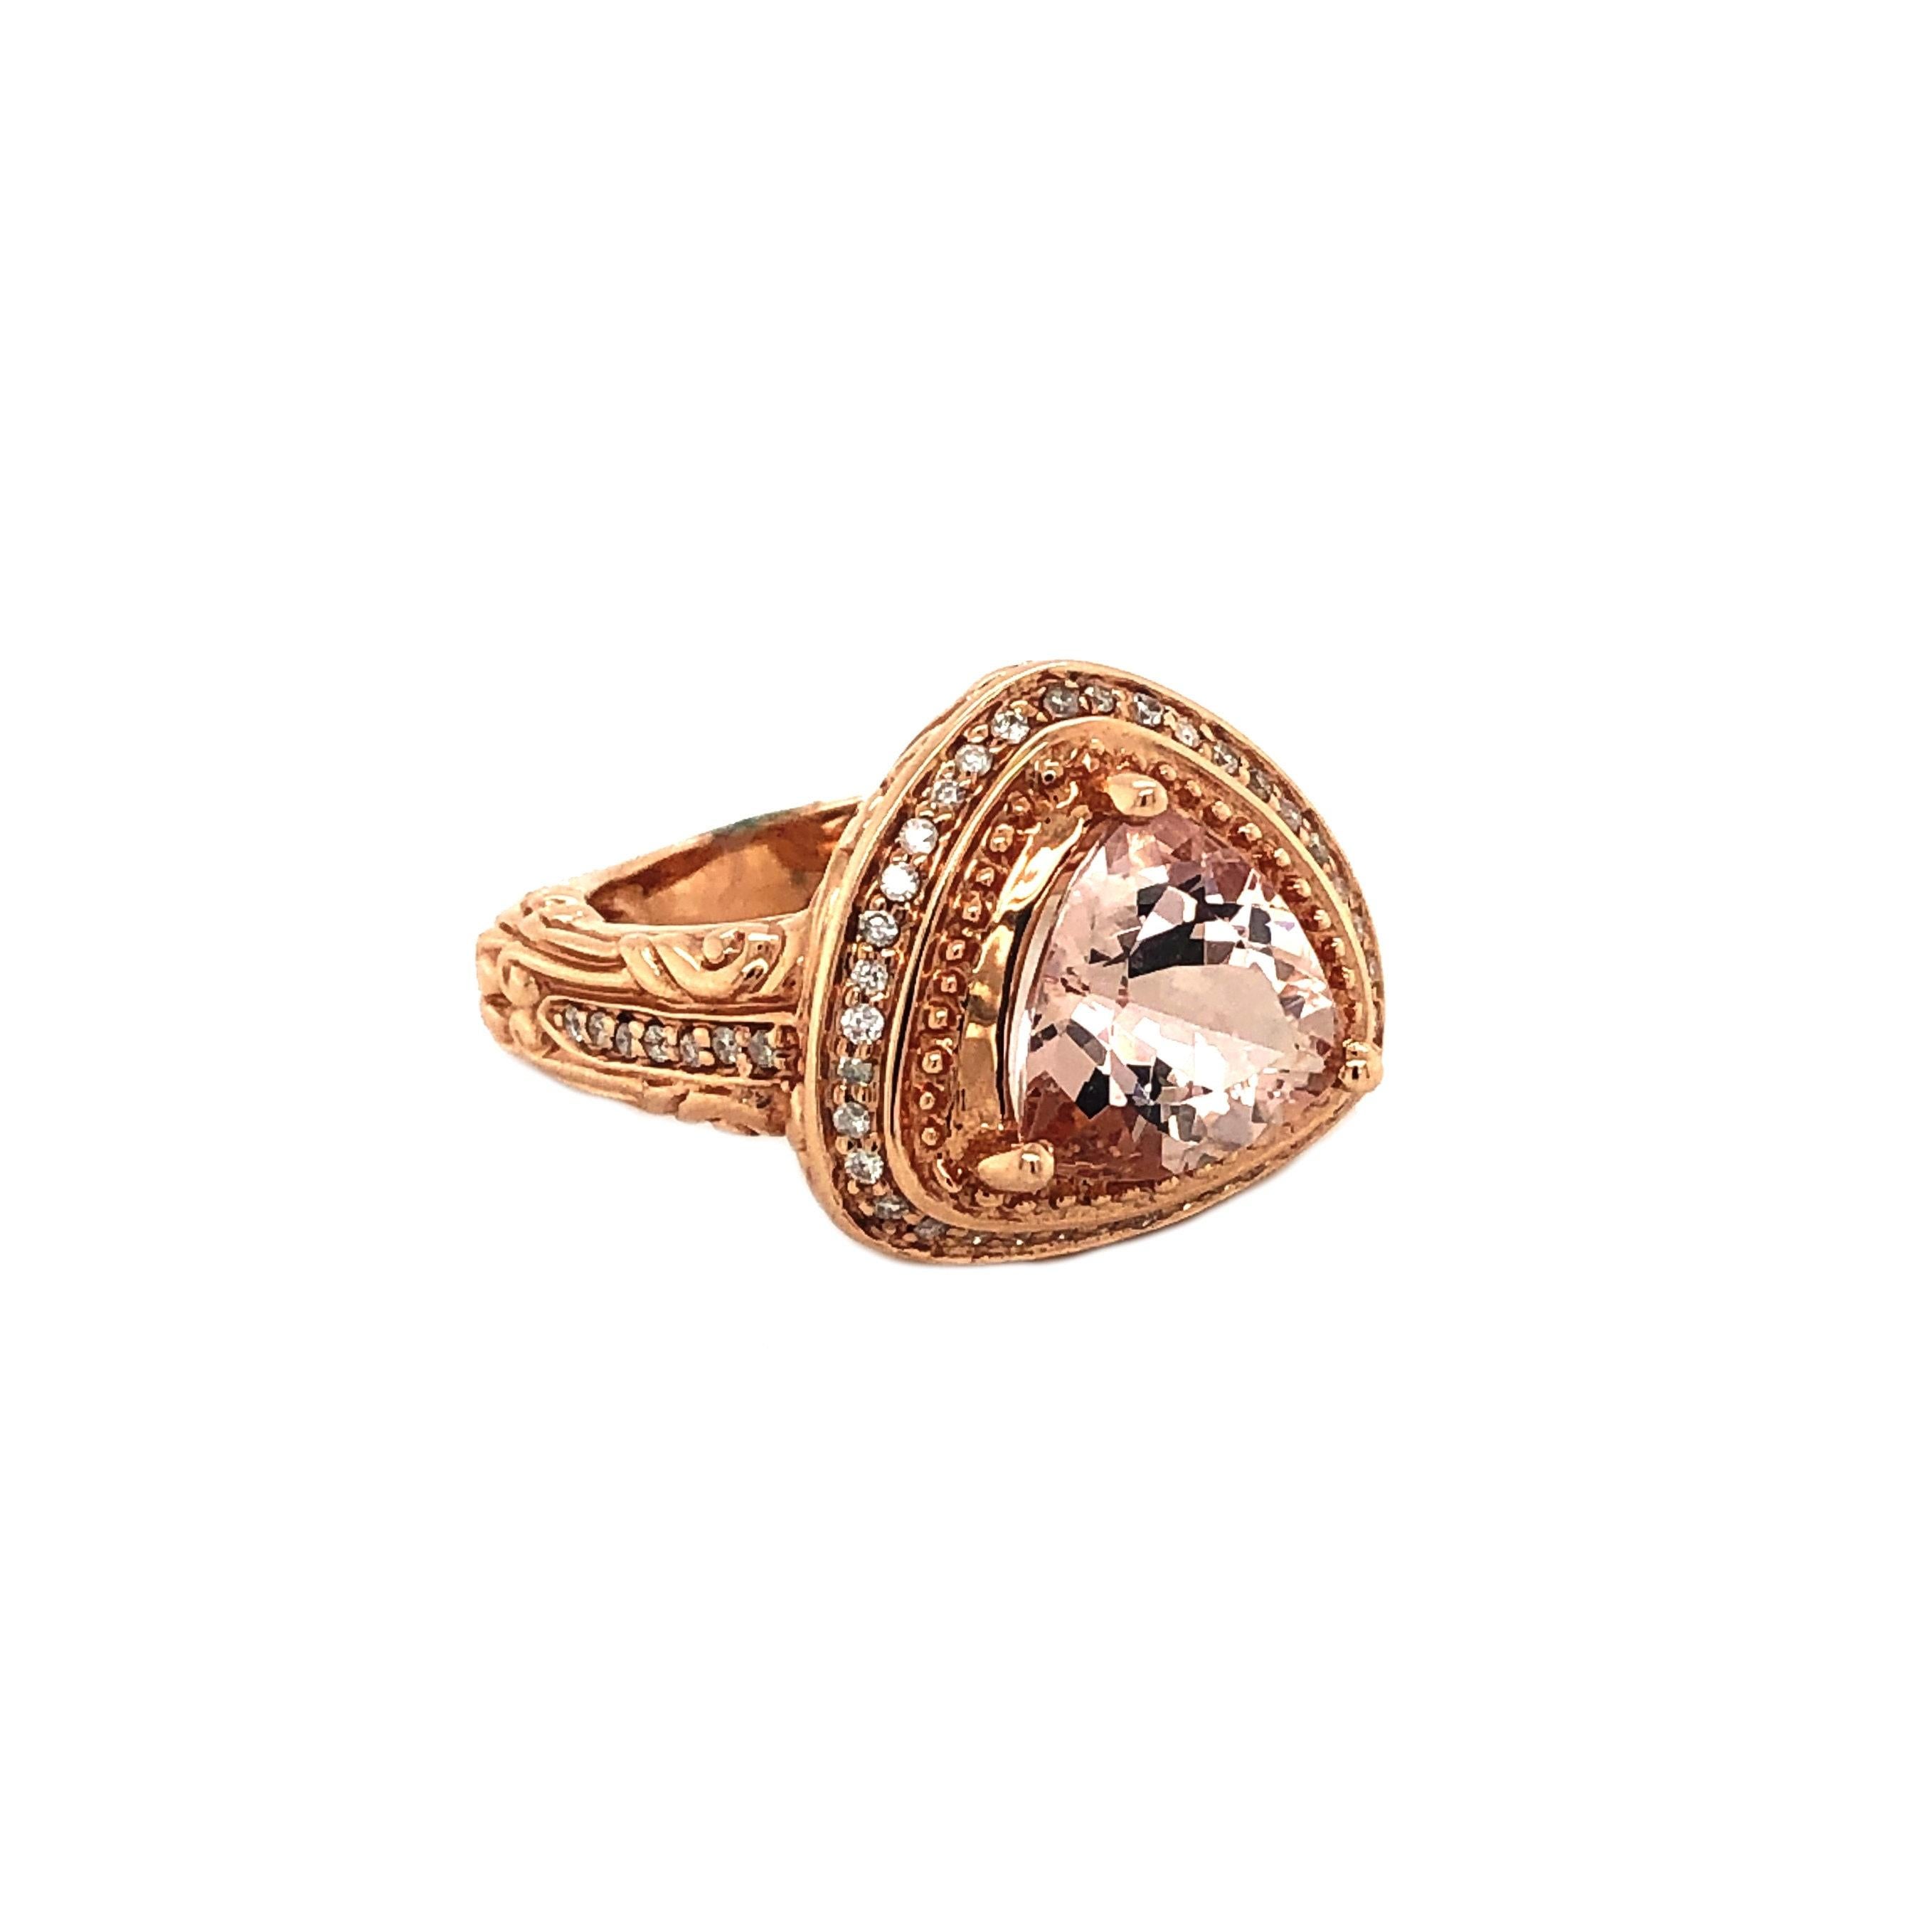 This is a gorgeous natural morganite and diamond vintage ring set in solid 14k rose gold. The natural 2.70 Ct trillion cut morganite has an excellent peachy pink color and is surrounded by a halo of round cut white diamonds. The ring is stamped 14k